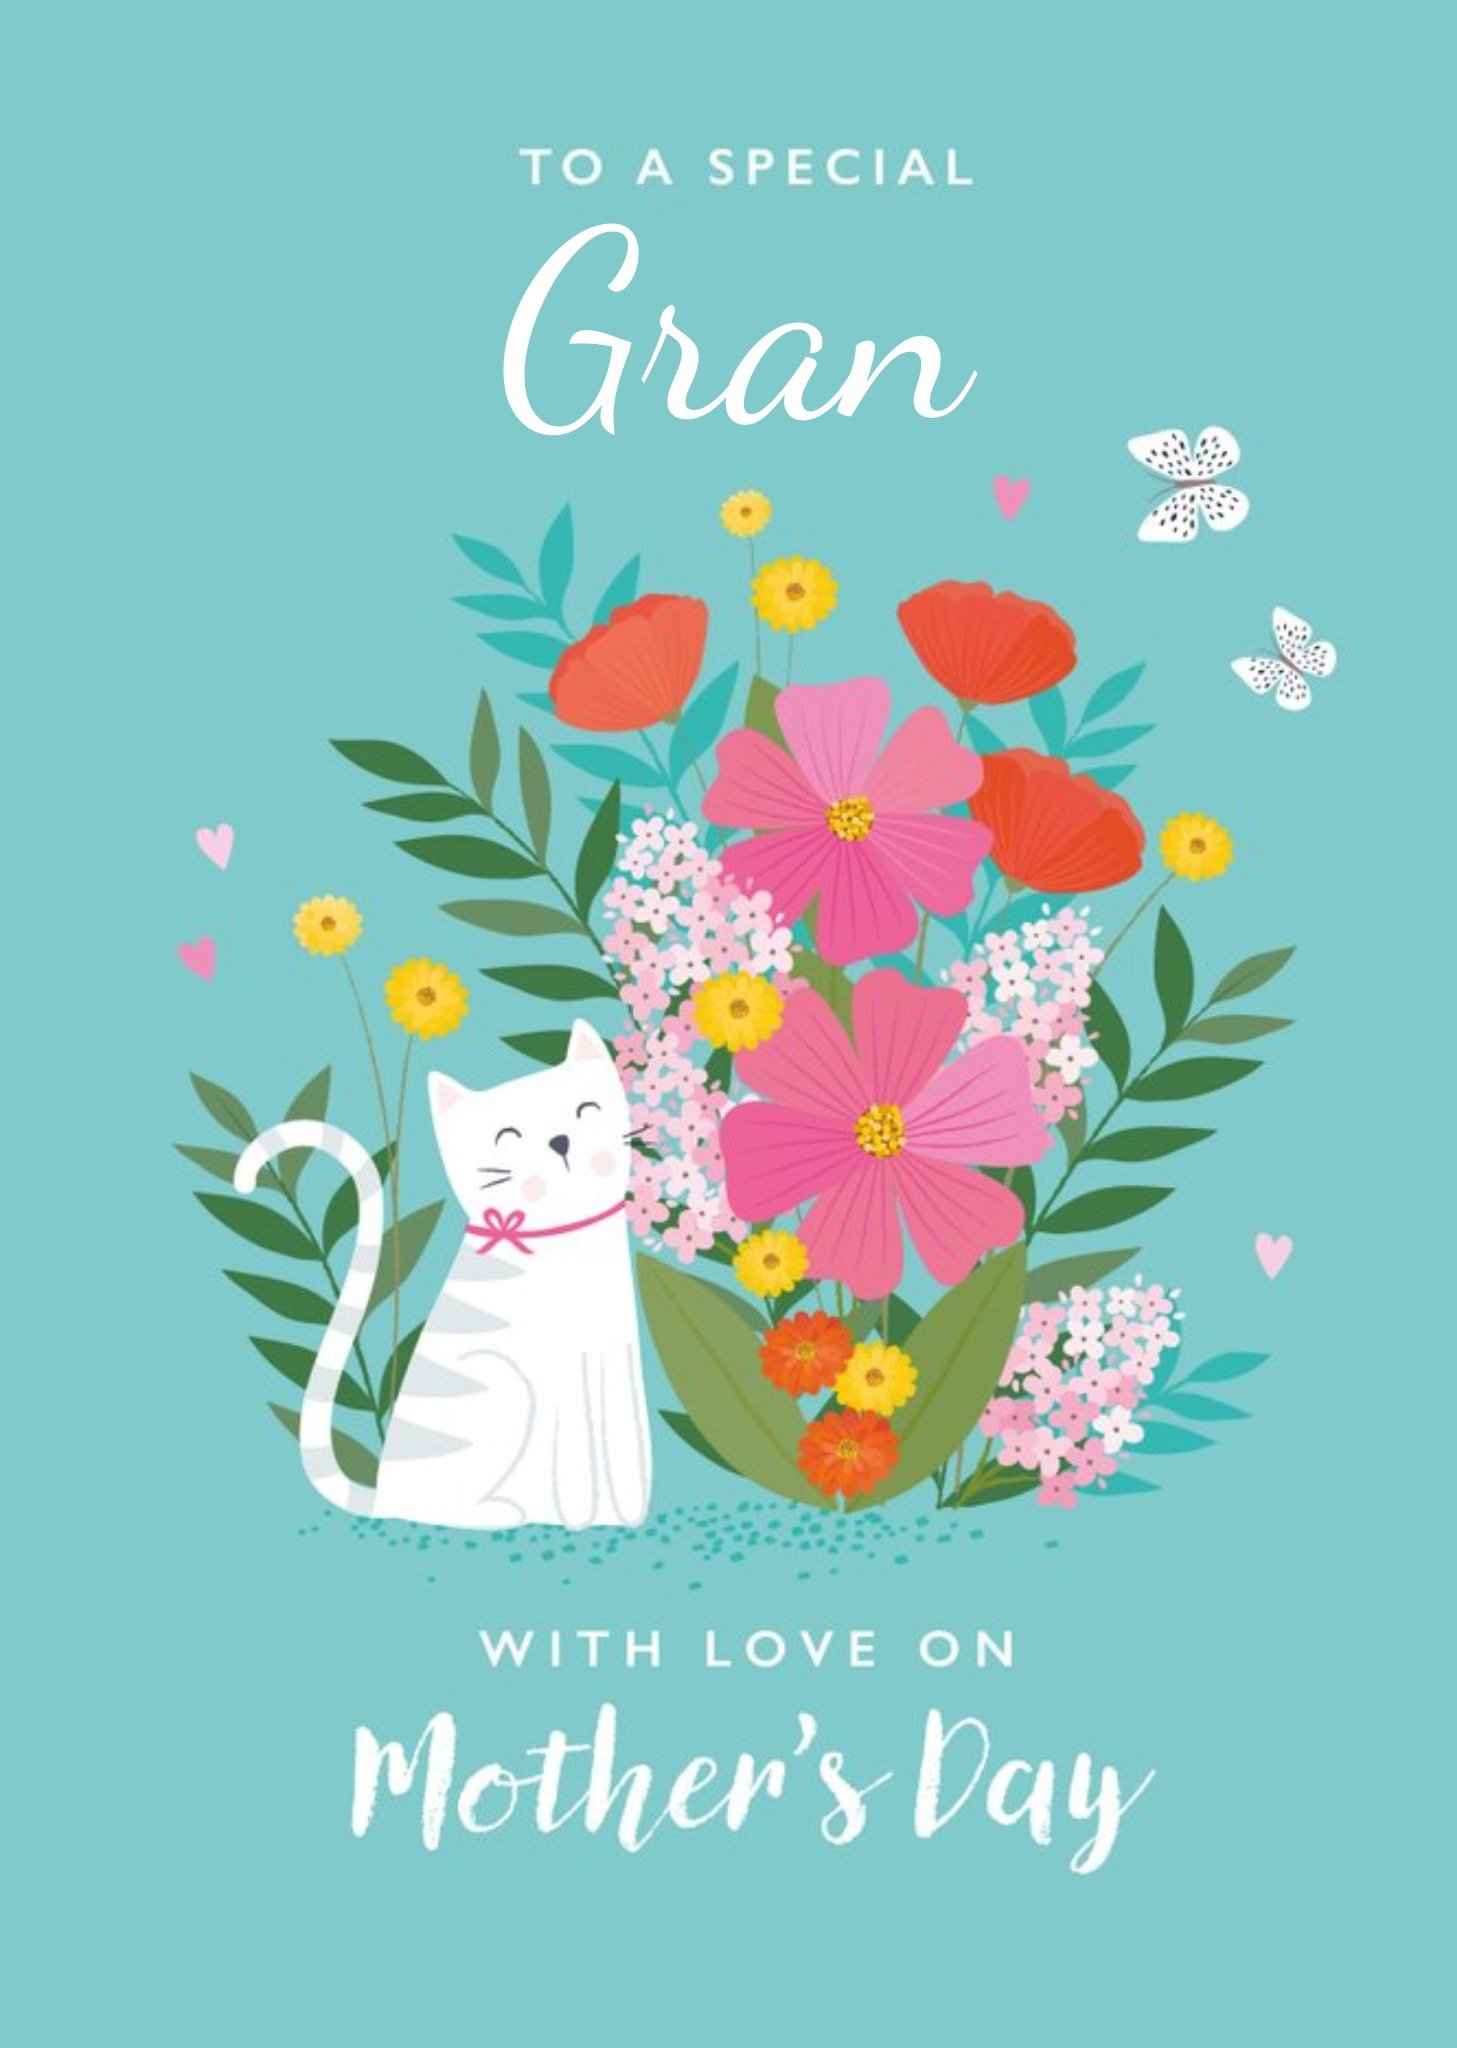 Moonpig Illustrated Cat Flowers Special Gran Teal Mothers Day Card Ecard